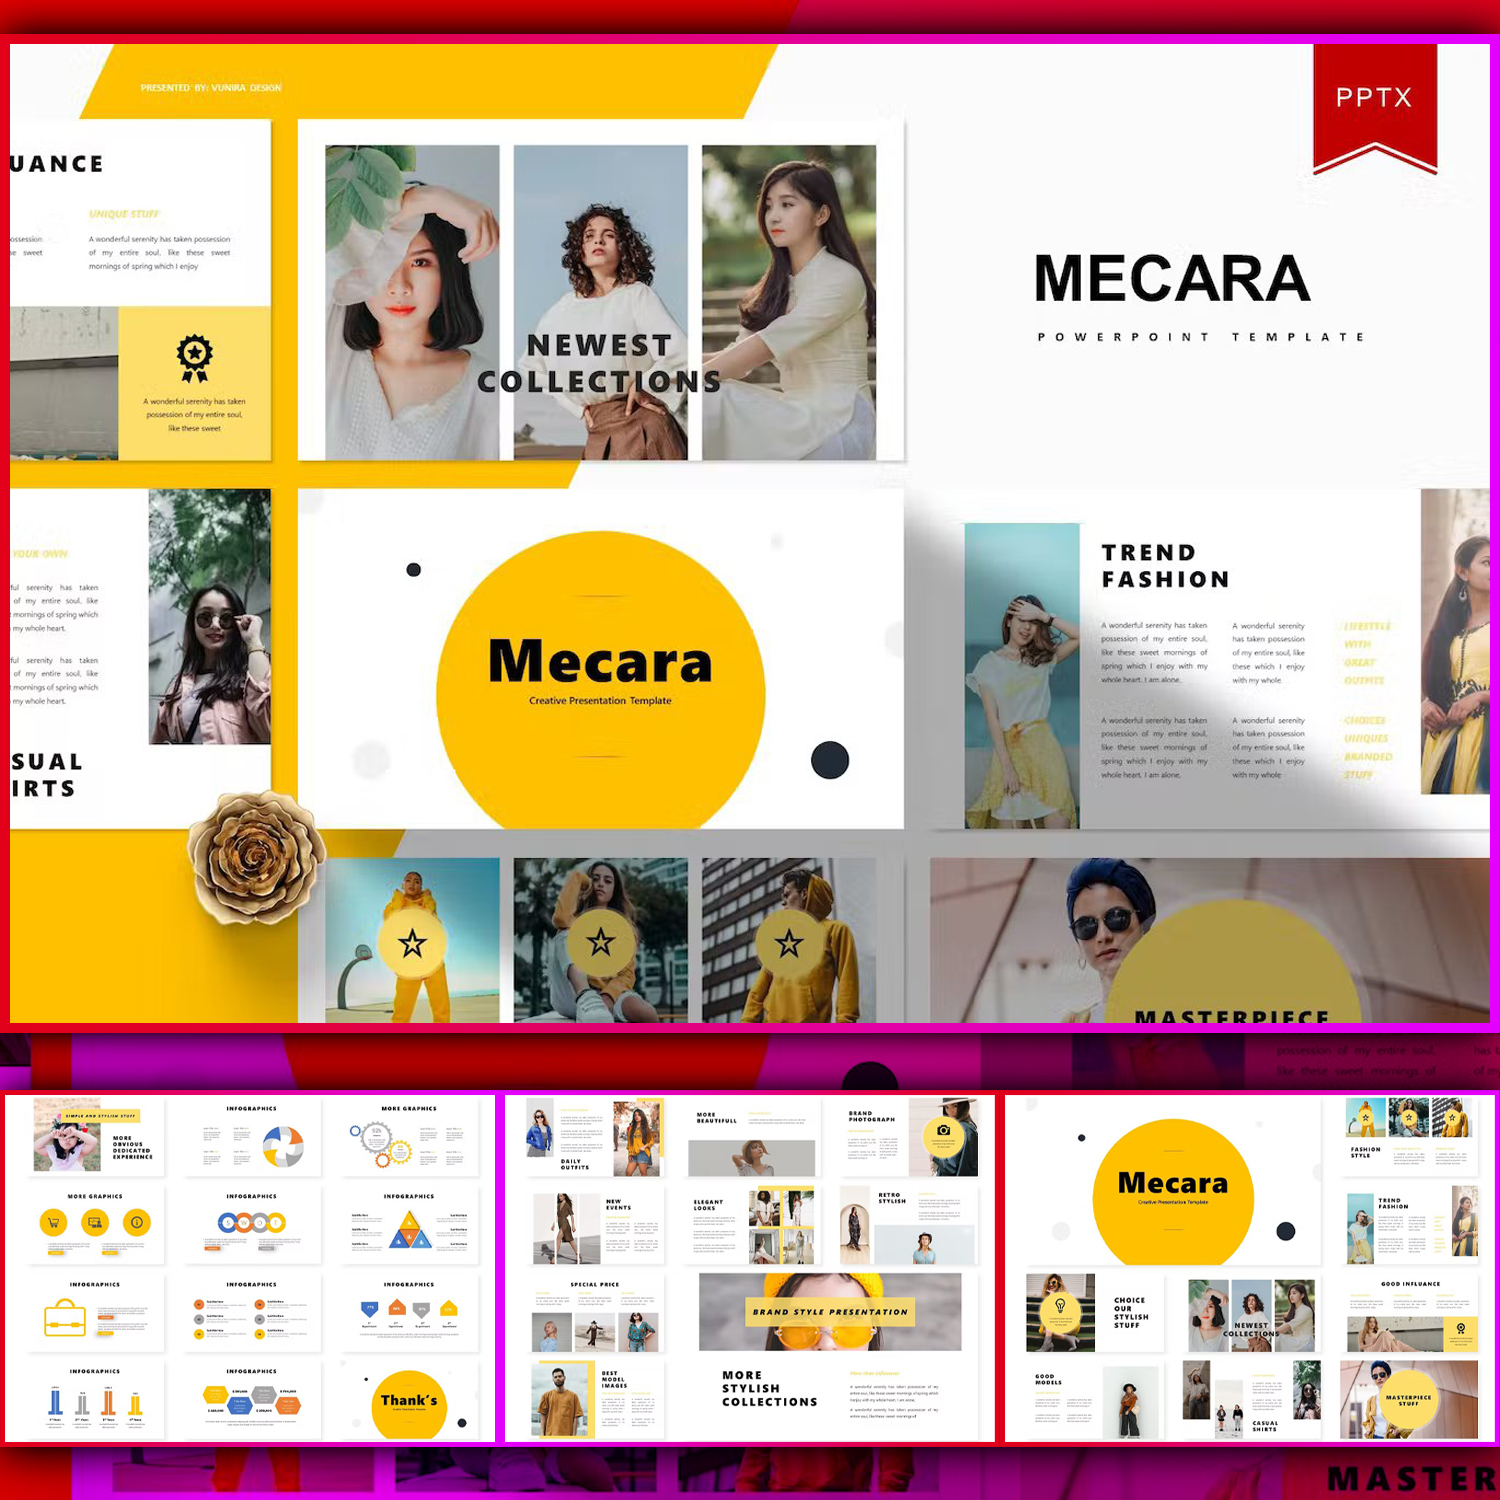 Images preview mecara powerpoint template.